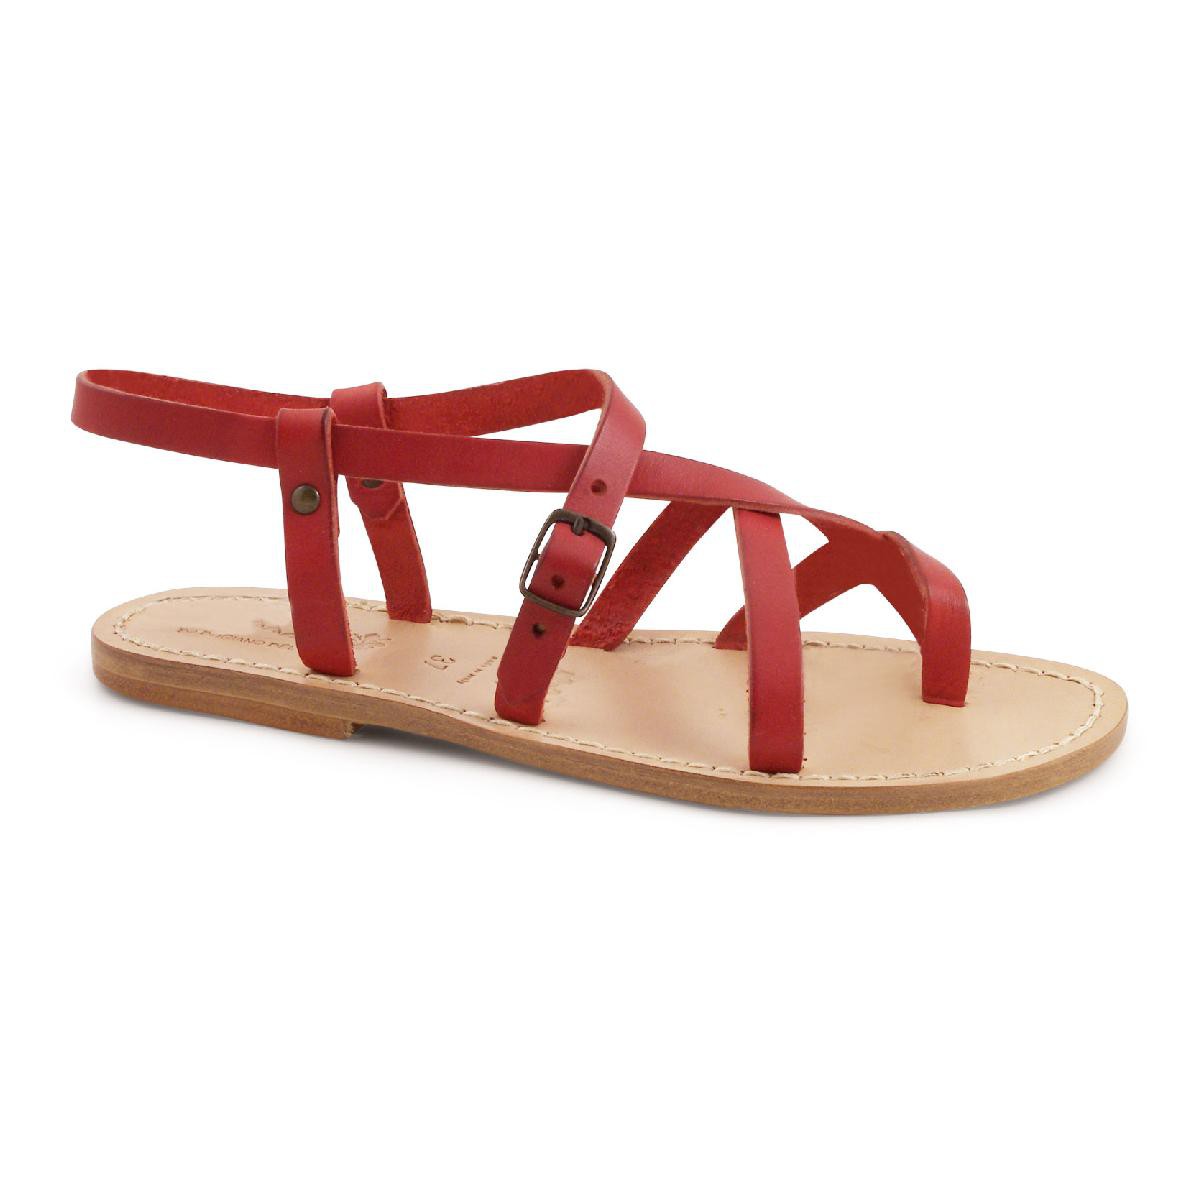 Red leather flat sandals for women handmade in Italy | Gianluca - The ...